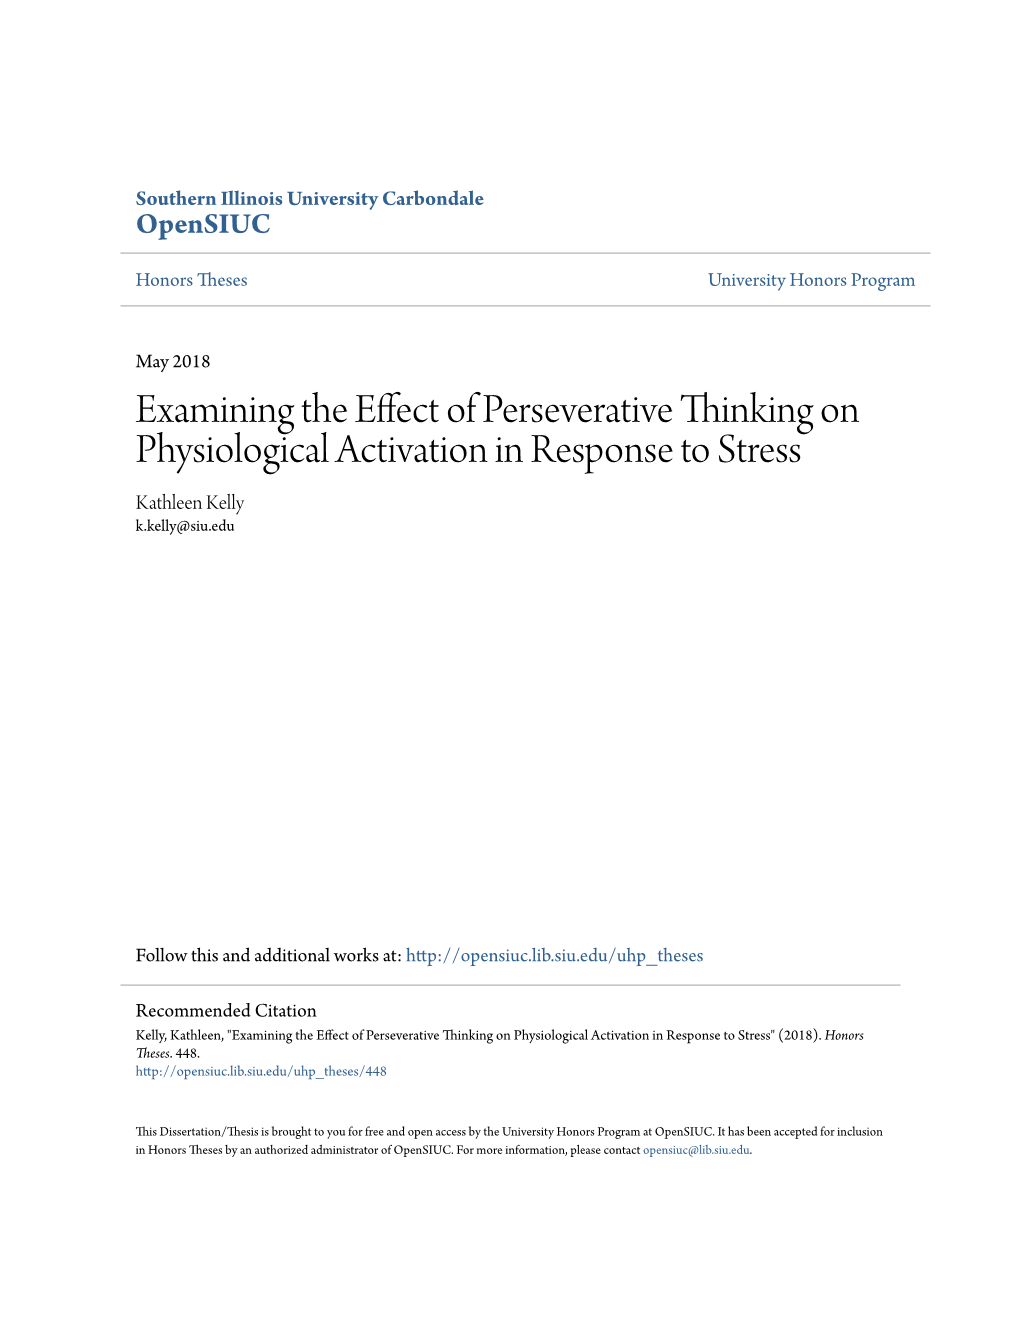 Examining the Effect of Perseverative Thinking on Physiological Activation in Response to Stress Kathleen Kelly K.Kelly@Siu.Edu